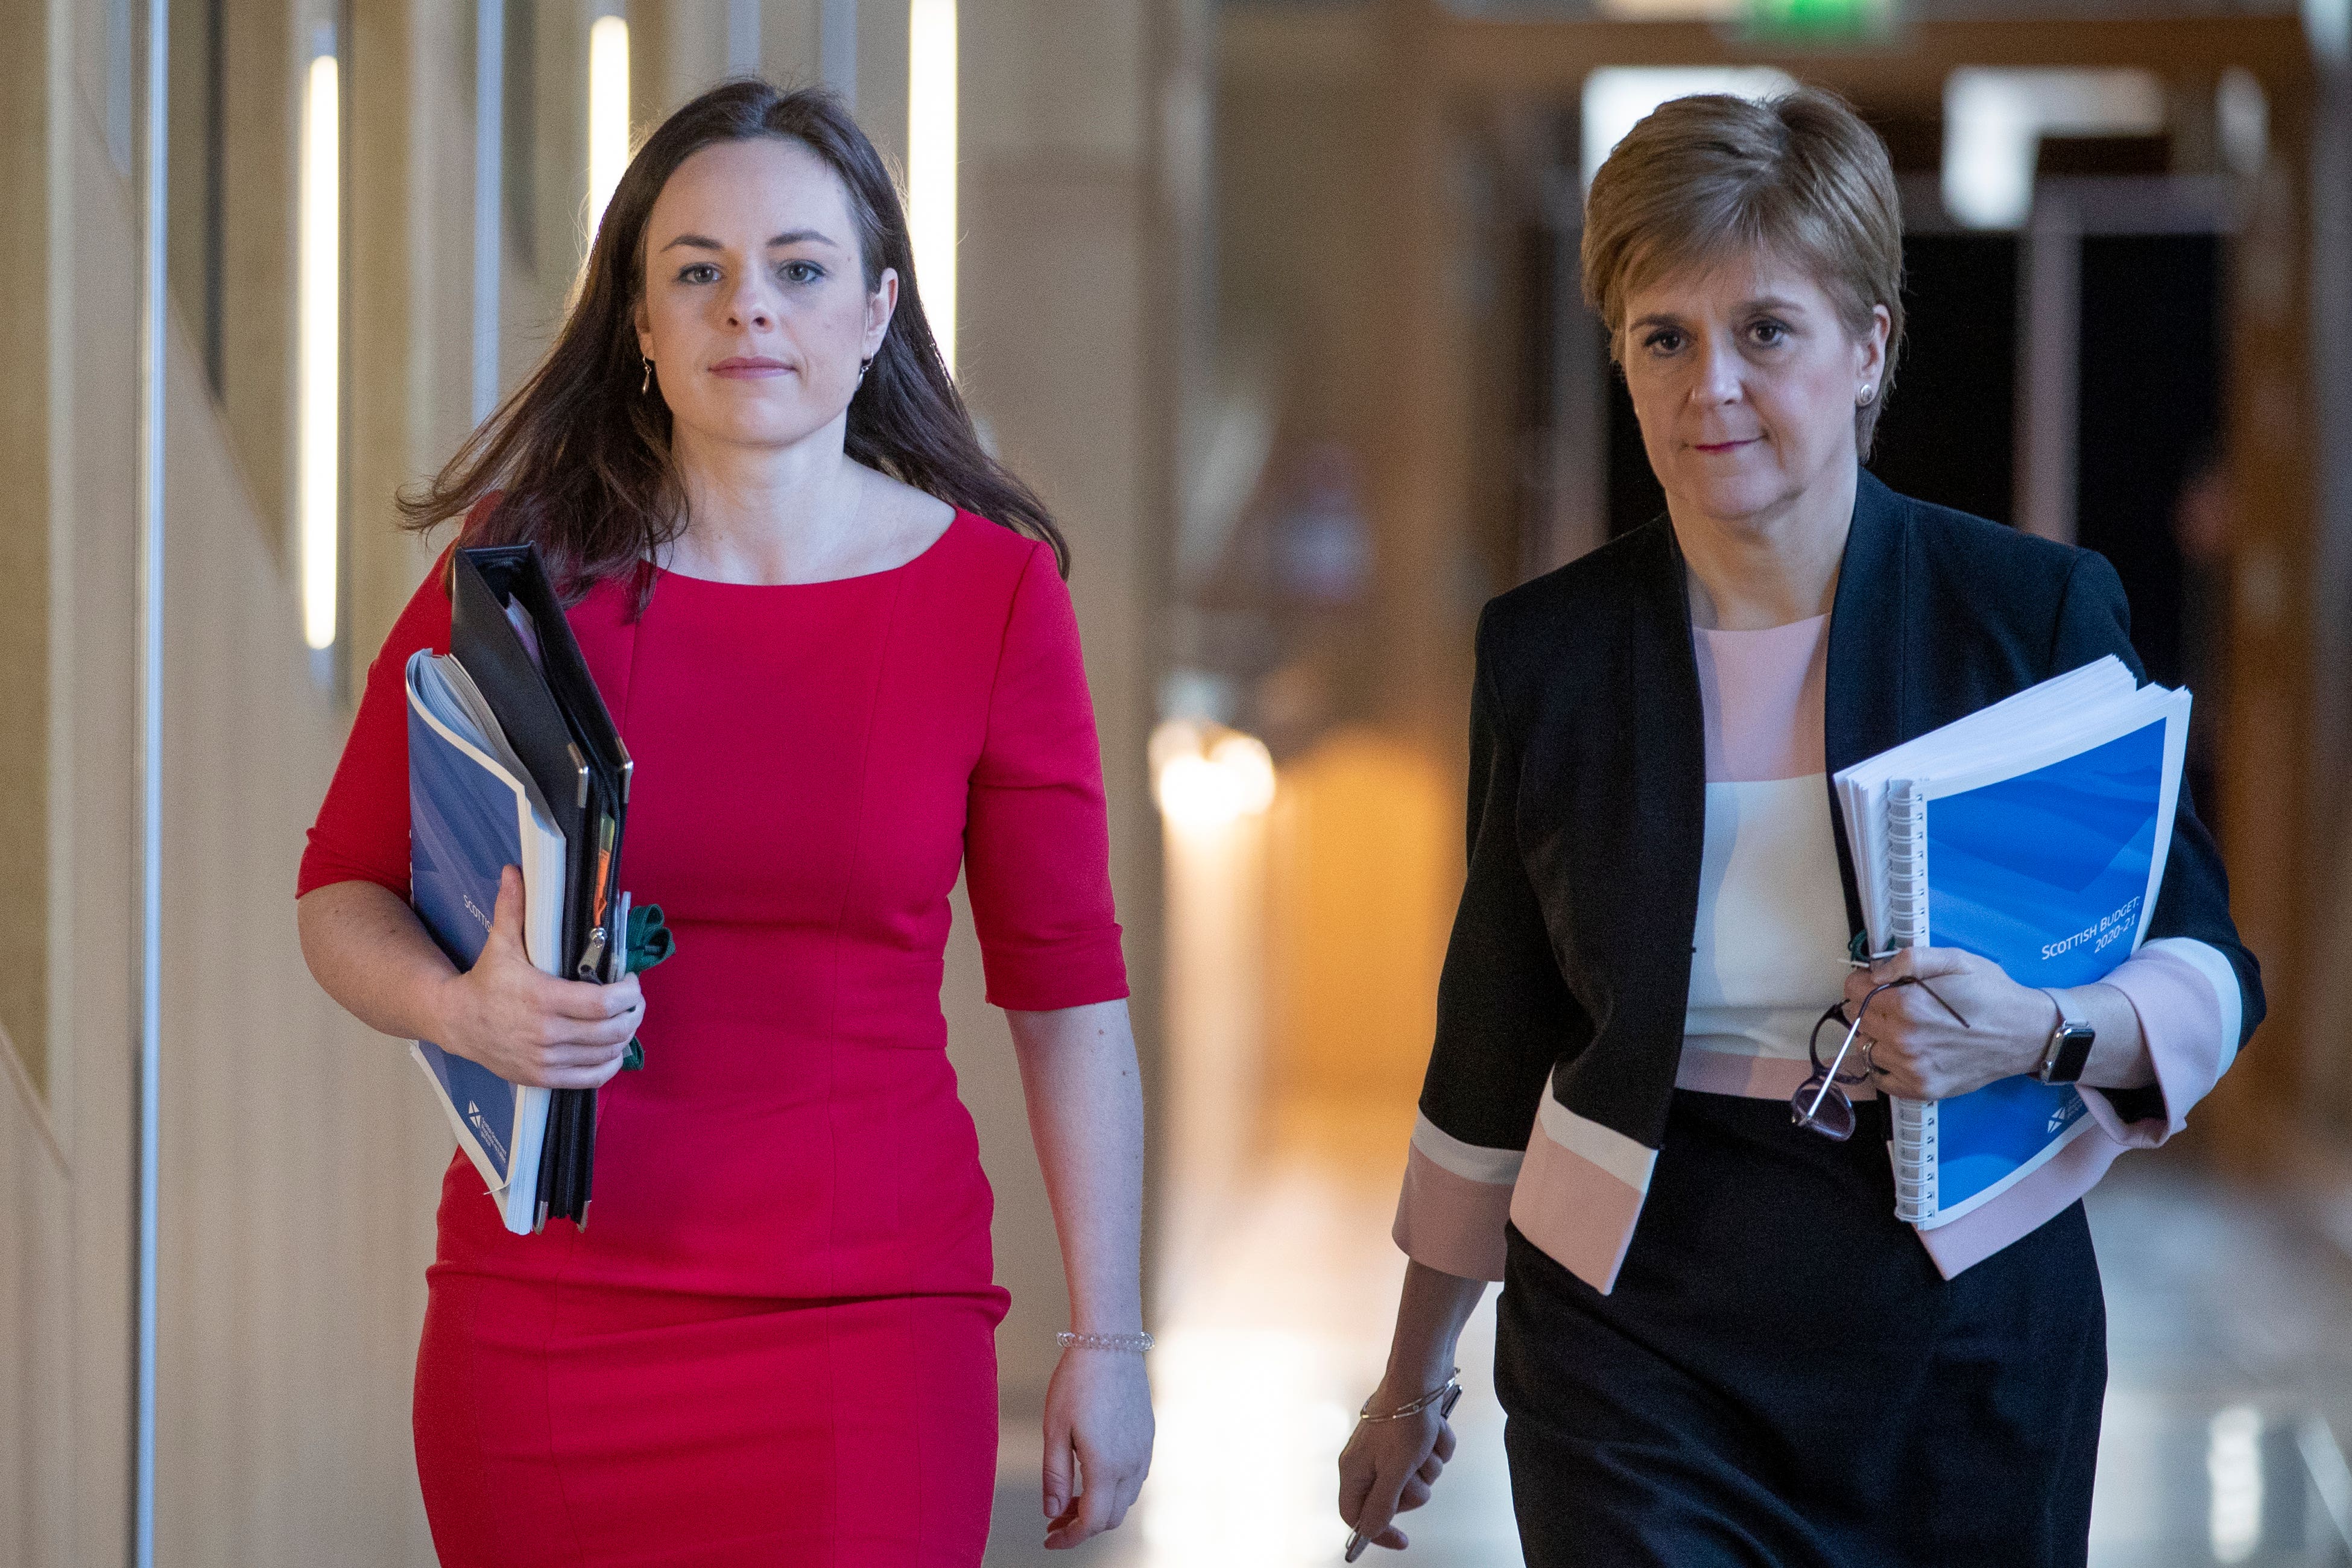 Ms Forbes is hoping to succeed Nicola Sturgeon as Scotland’s first minister